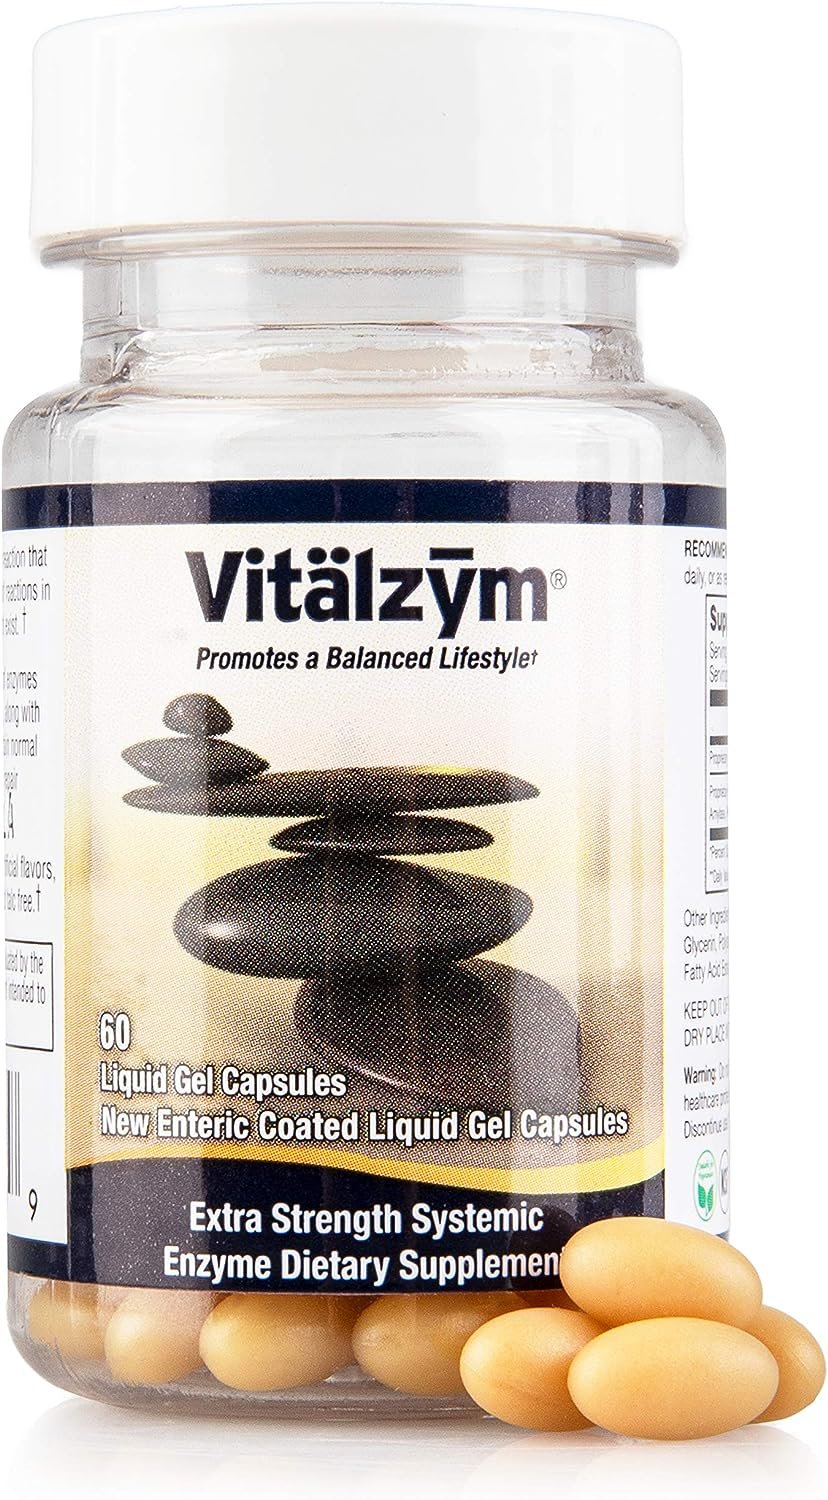 VITÄLZYM Proteolytic Systemic Enzymes Liquid Gel Capsules with Serrapeptase, Immune and Joint Support, Natural Ache Relief Plus Fertility Supplement (60 Capsules)